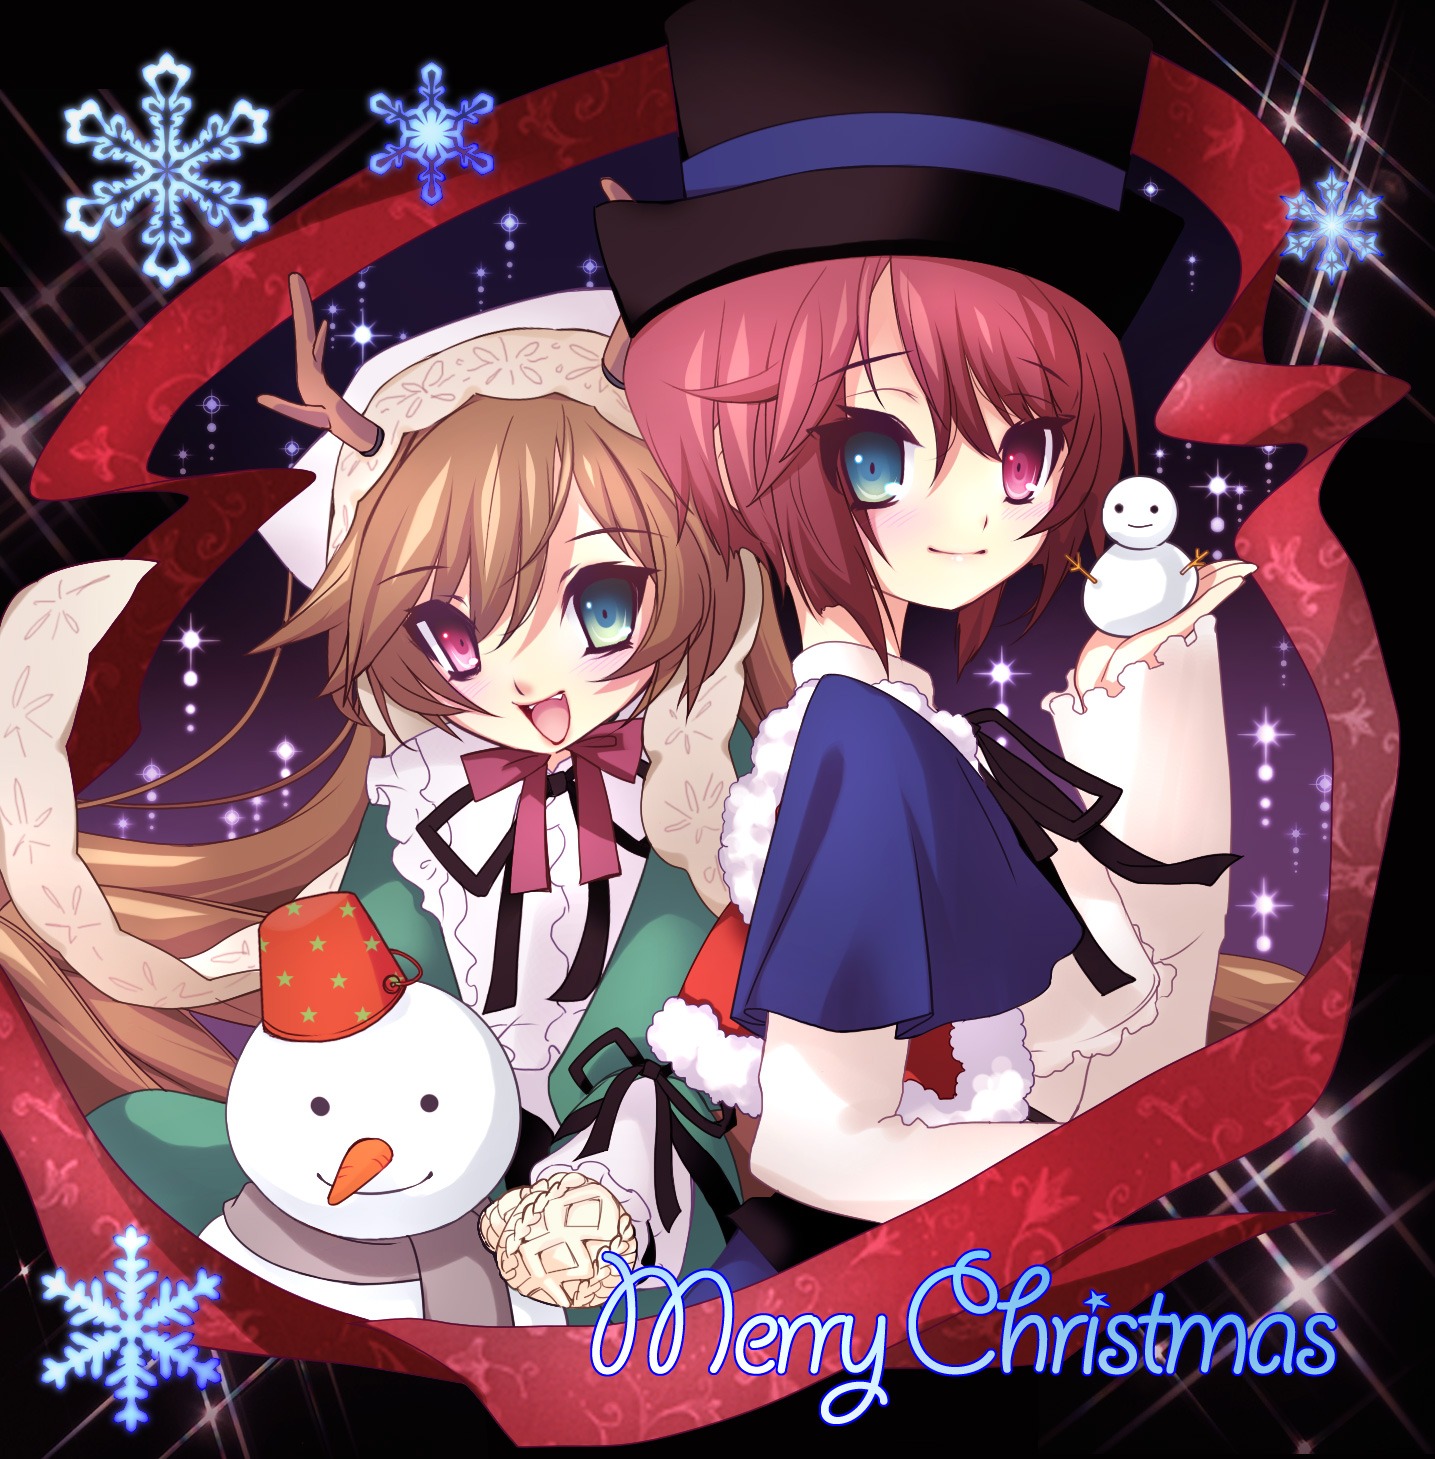 2girls antlers blue_eyes blush brown_hair christmas commentary_request dress fang hat heterochromia highres image long_hair merry_christmas mittens multiple_girls open_mouth pair red_eyes ribbon room603 rozen_maiden short_hair siblings sisters smile snowflakes snowman souseiseki suiseiseki top_hat twins very_long_hair